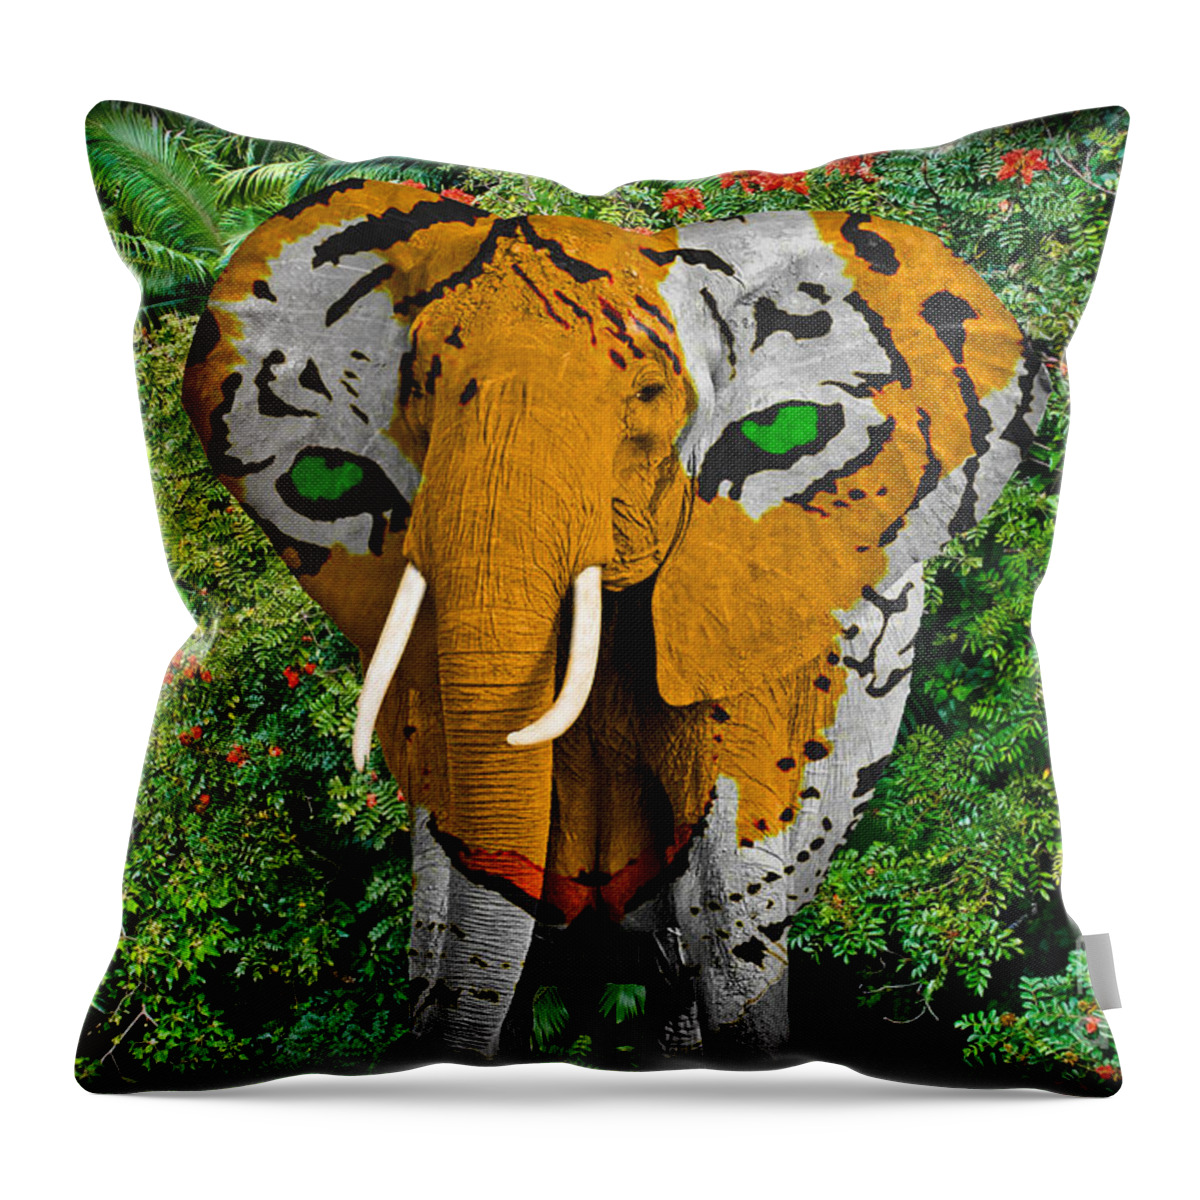 Elephant Throw Pillow featuring the photograph Elephant Tiger Abstract by Gary Keesler